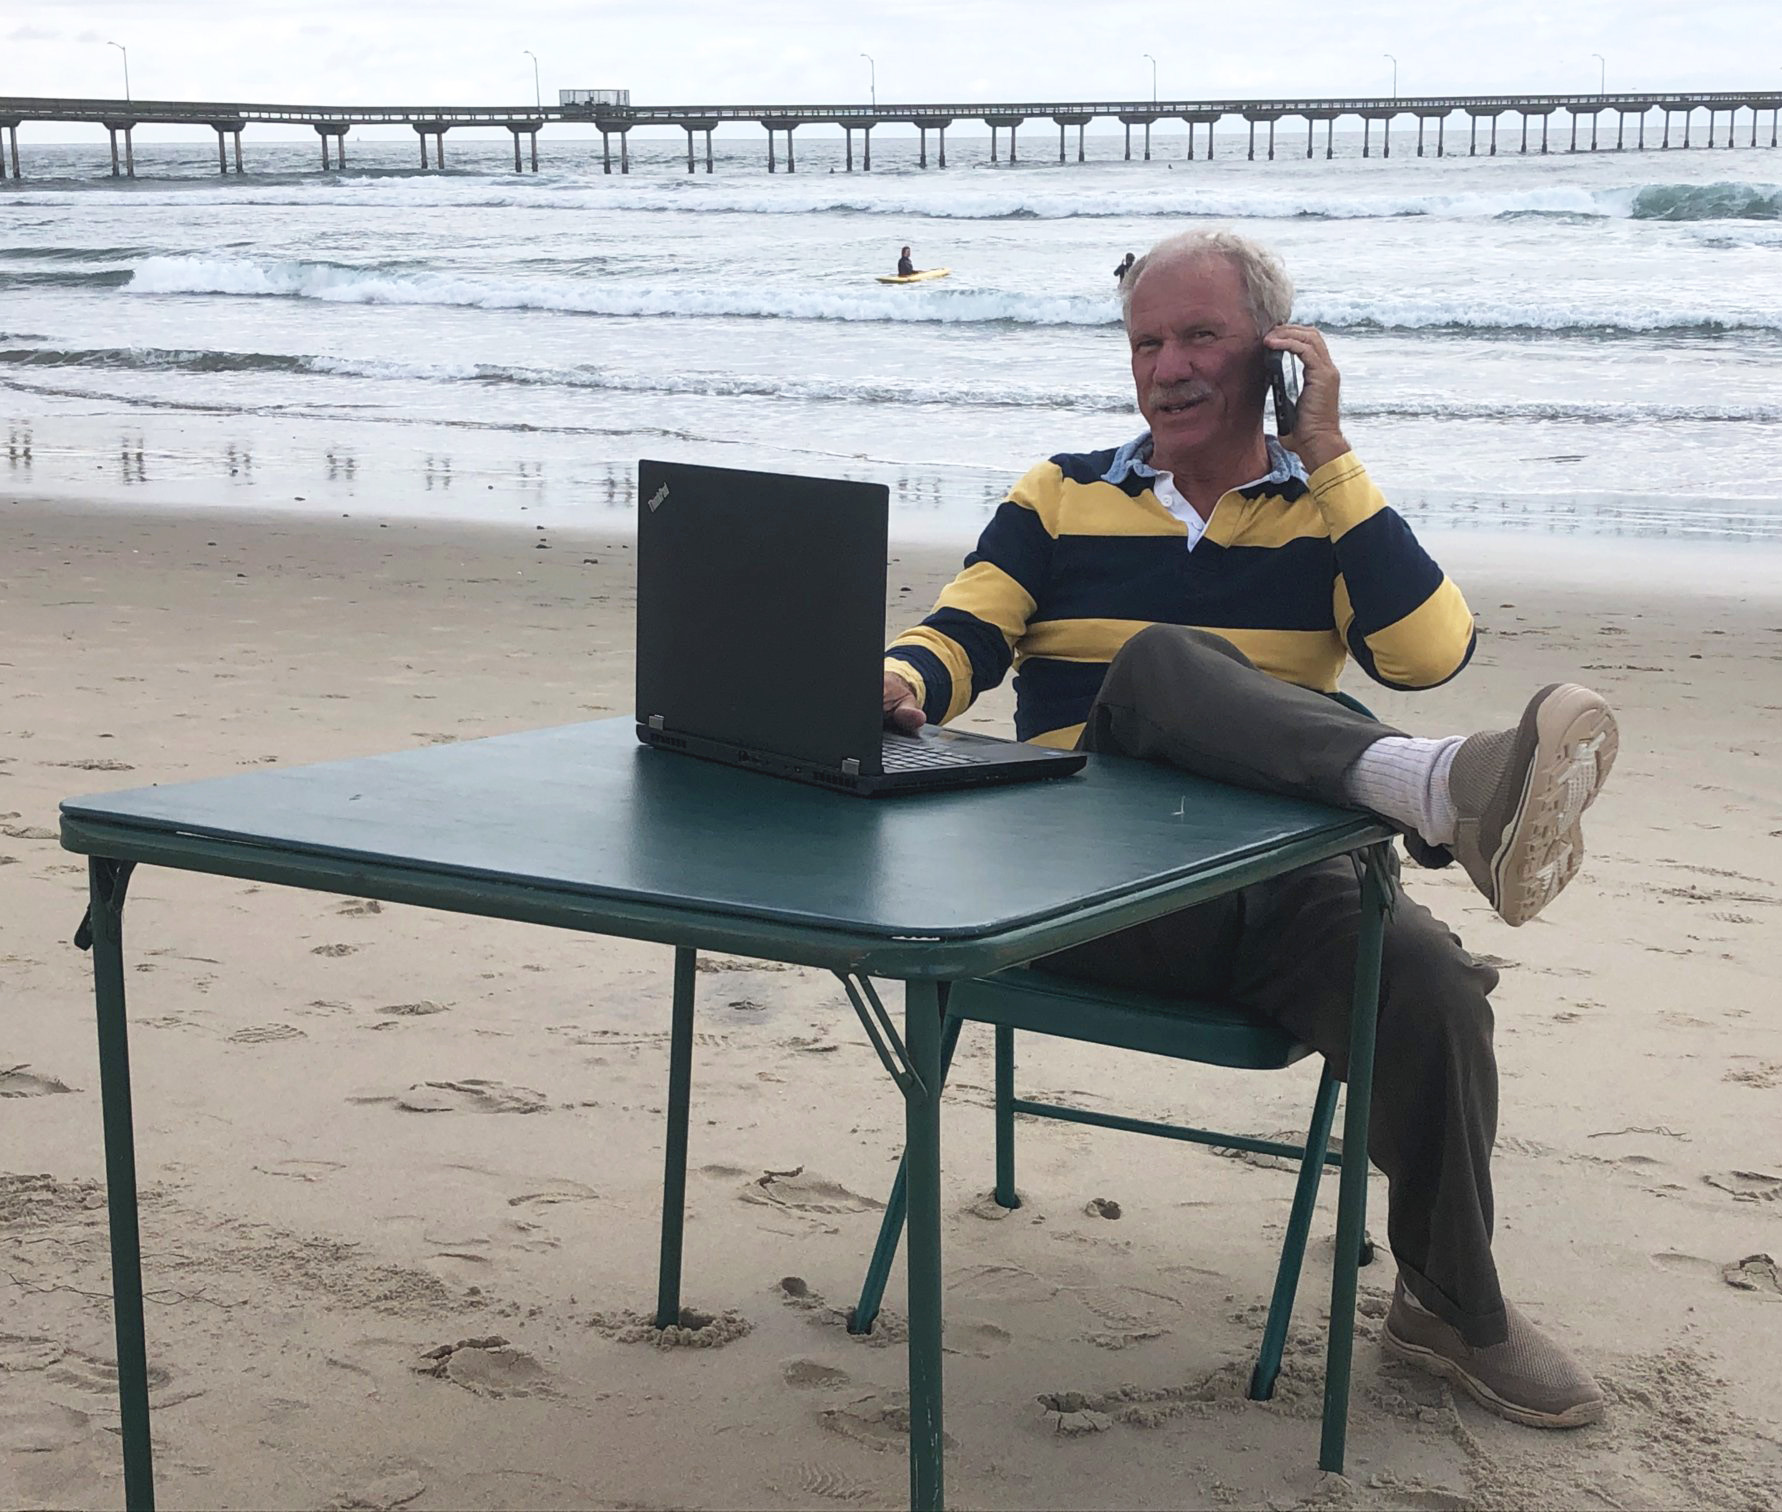 A man sits at a card table on a beach while talking on the phone. A laptop computer is on the table. A pier extends into the ocean in the background.